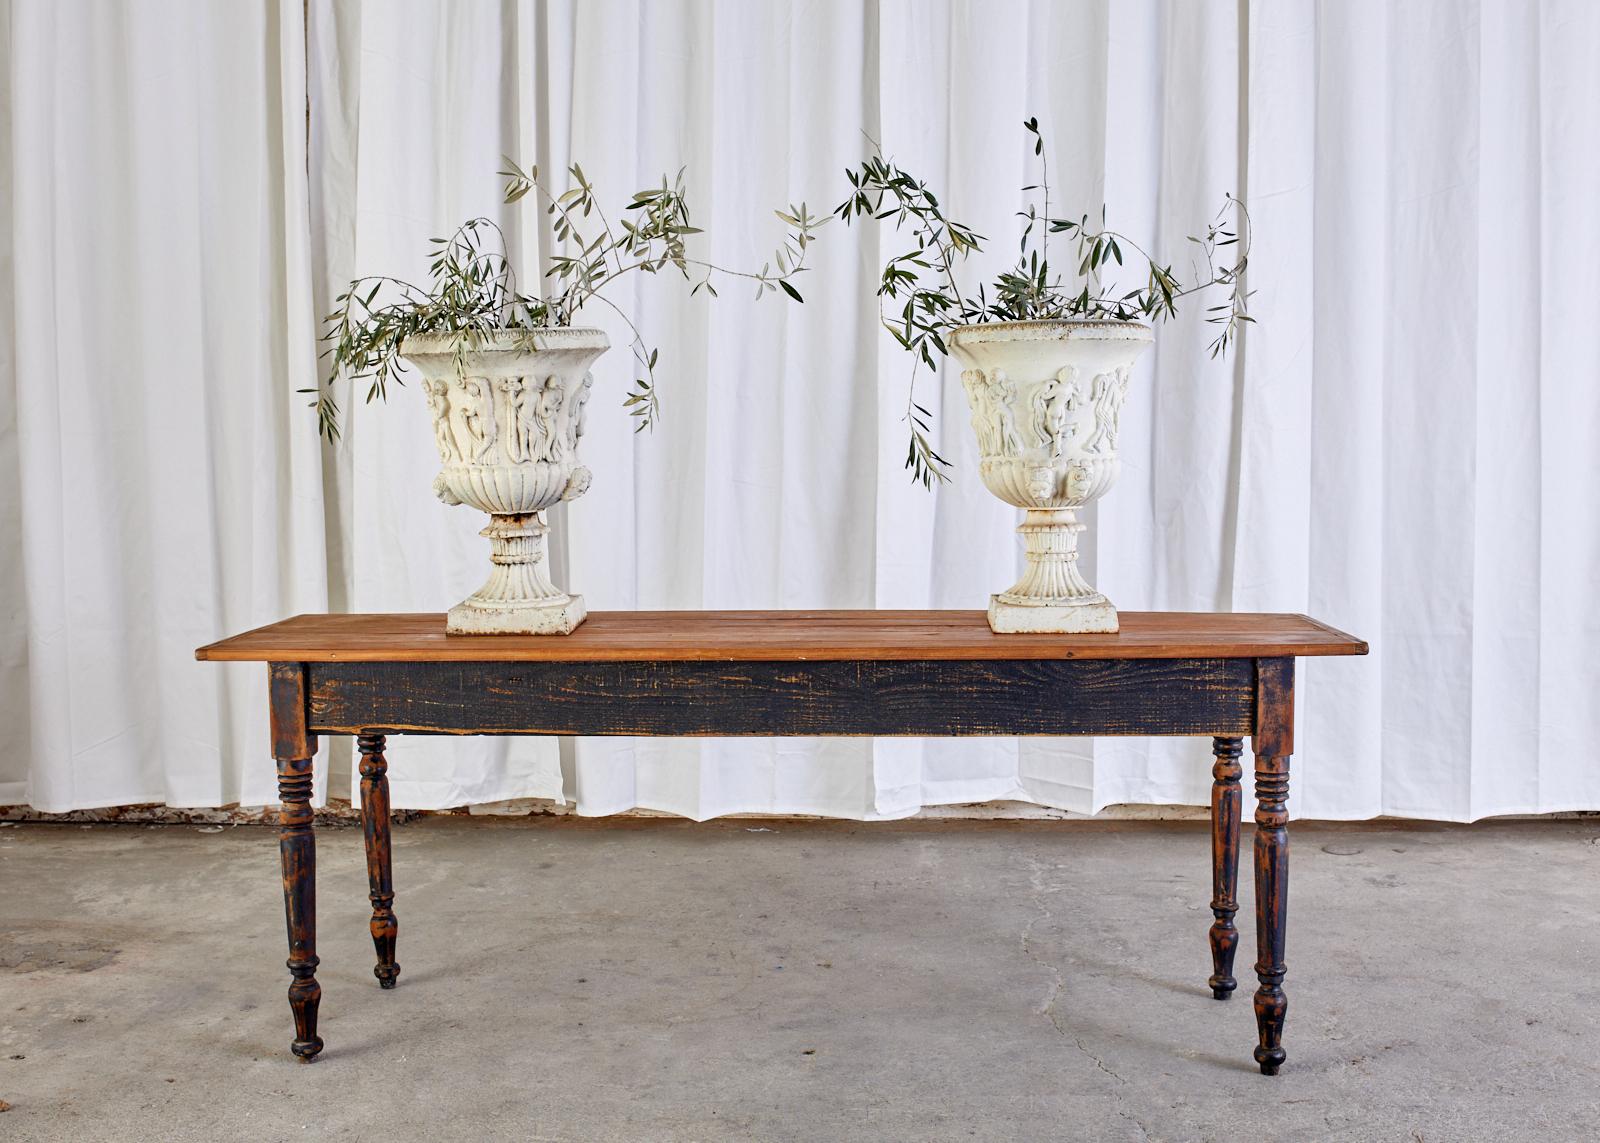 Magnificent pair of English neoclassical revival garden urns or jardinières crafted from cast iron. The urns are decorated with Greco-Roman figures with a fluted column base. Beautifully cast with an aged patina on the painted finish. From an estate